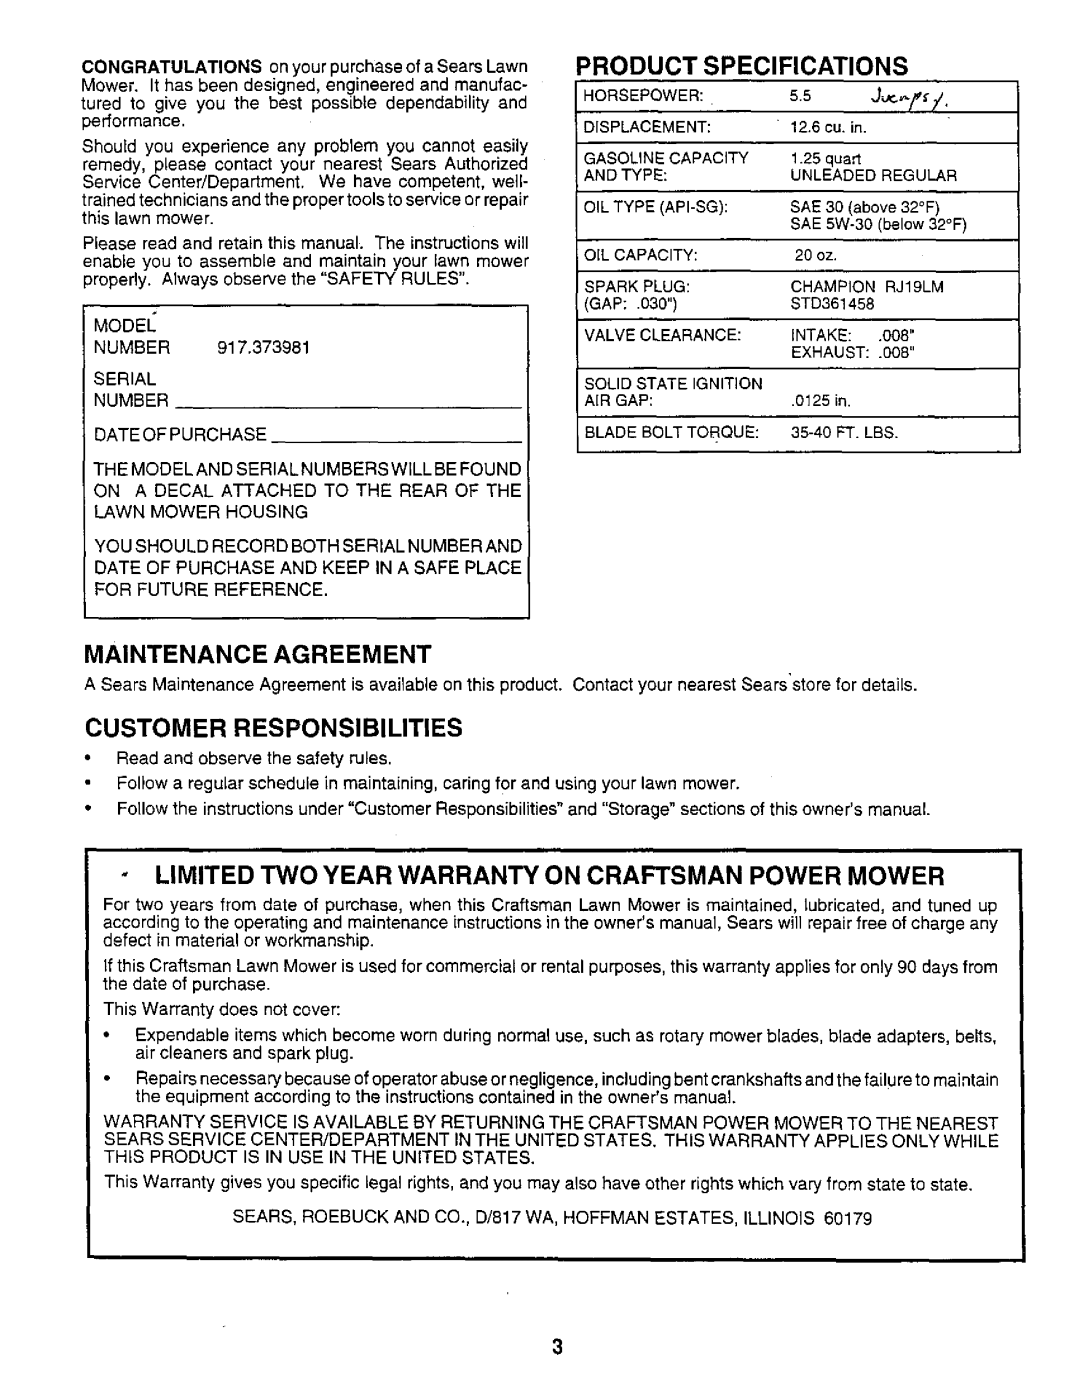 Sears 917.373981 owner manual Product Specifications, Maintenance Agreement, Customer Responsibilities 